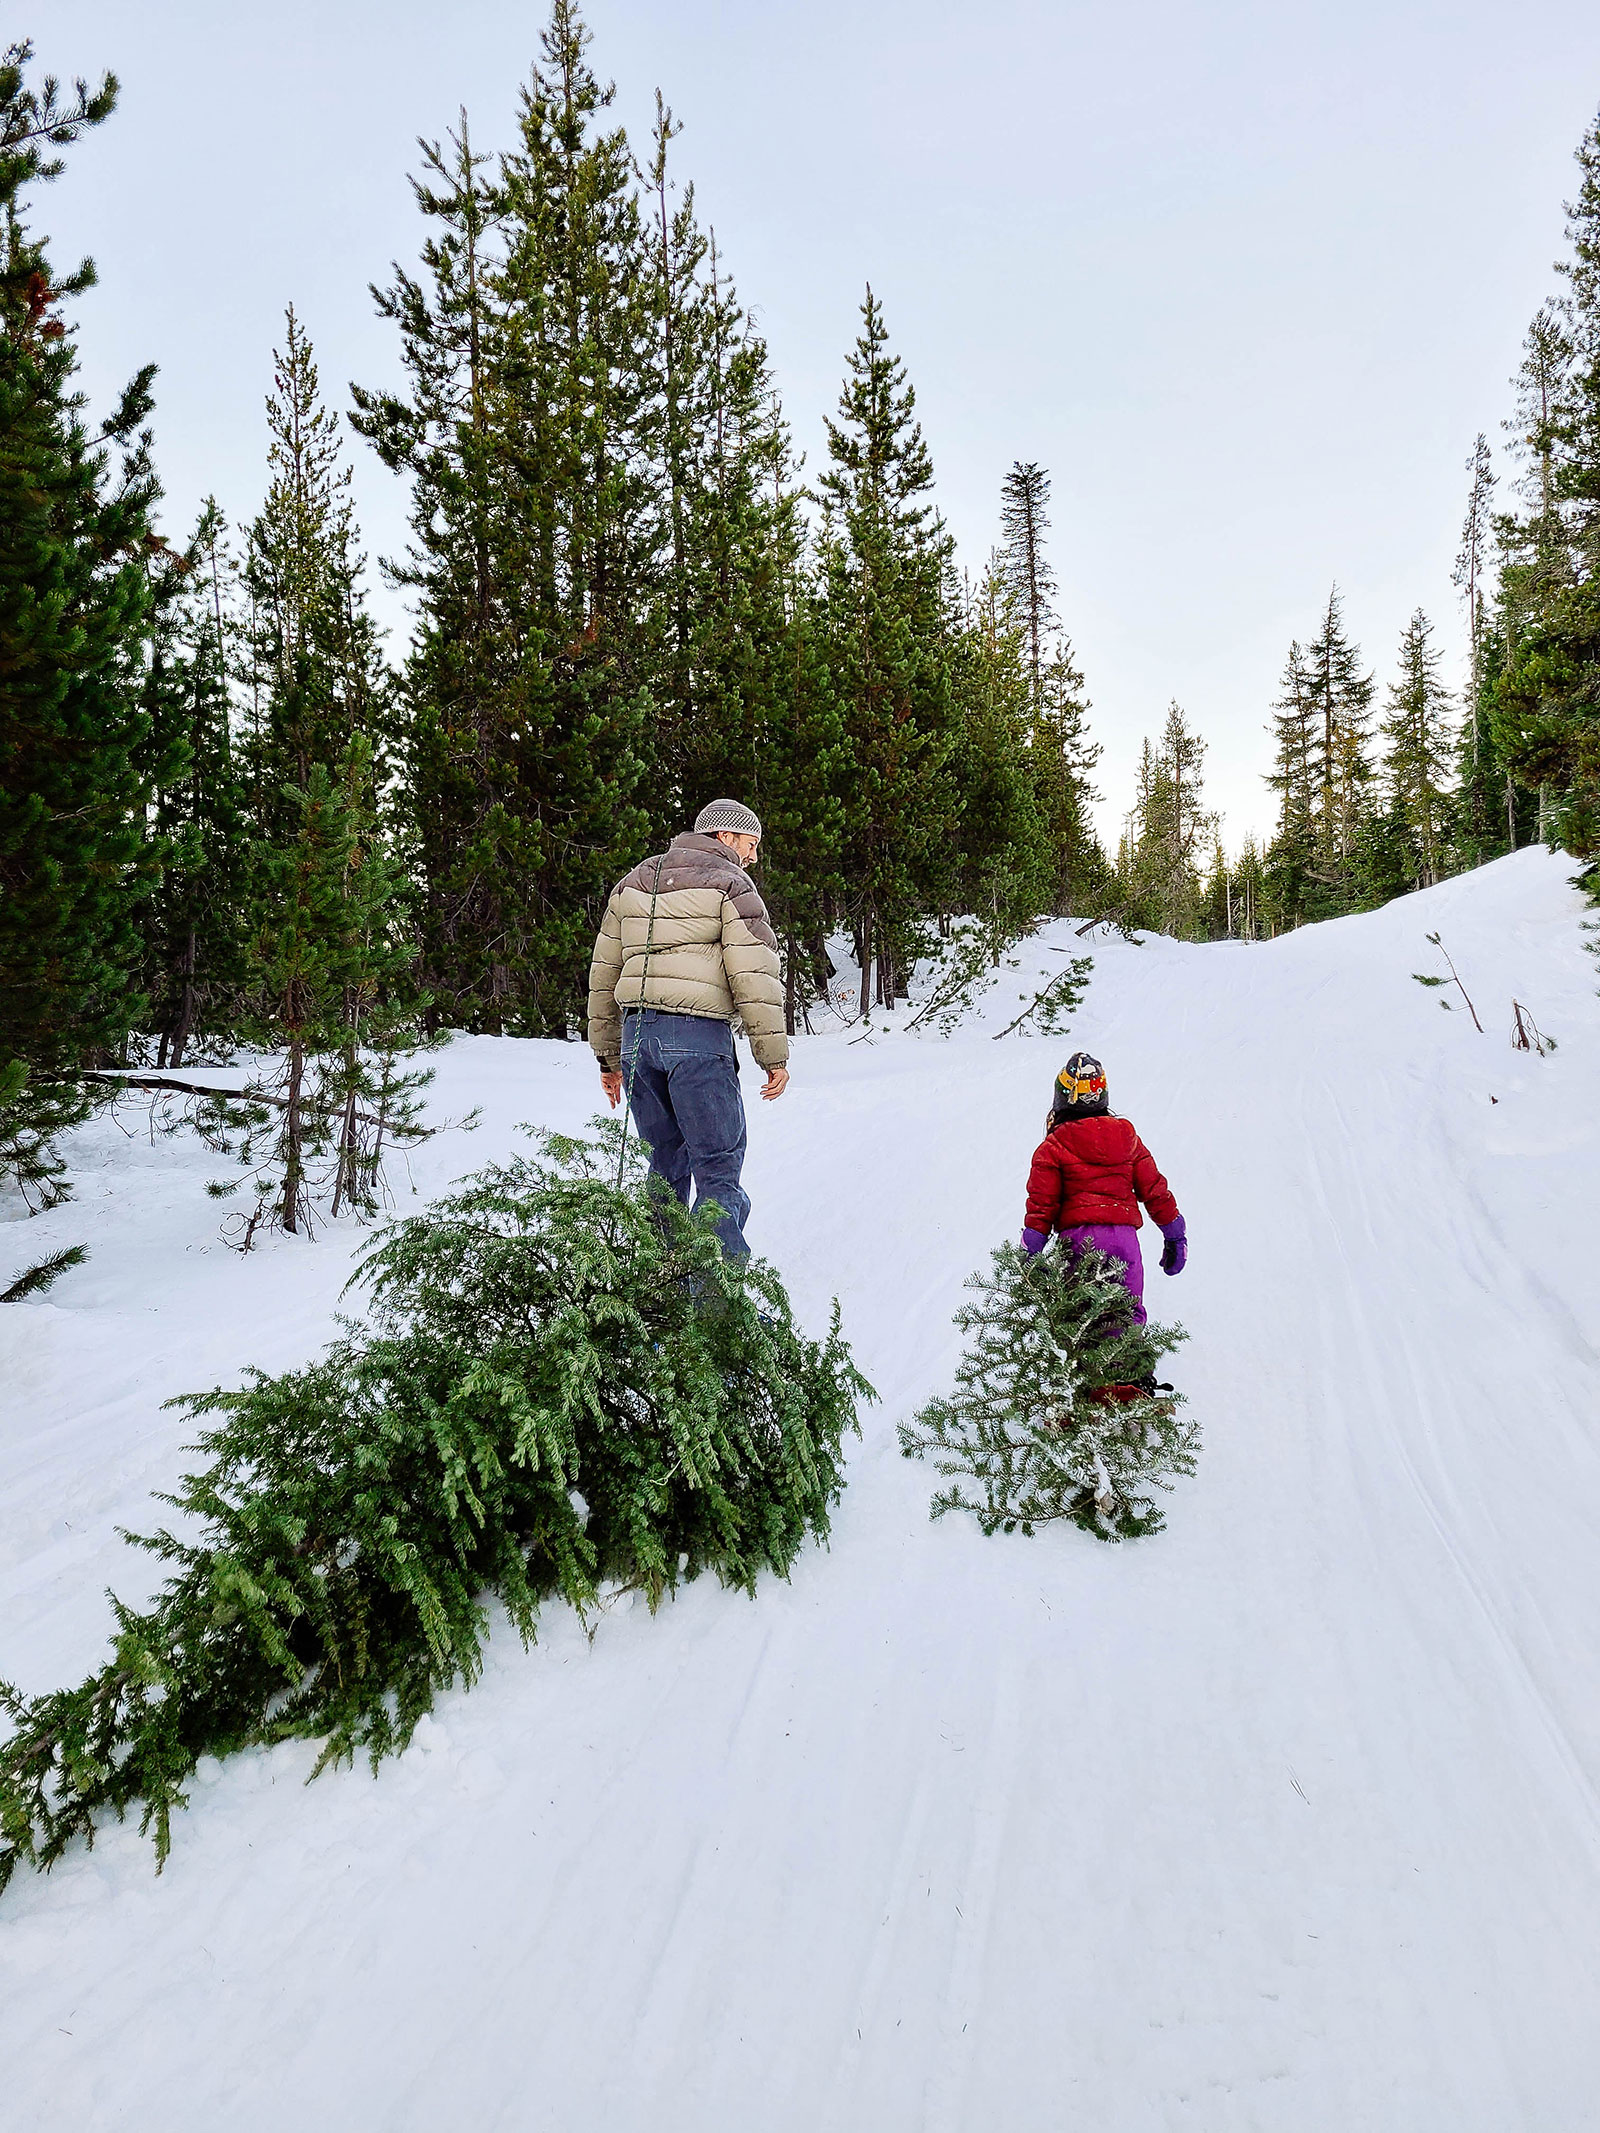 Father and daughter carrying freshly cut Christmas trees out of the forest on a snowy trail